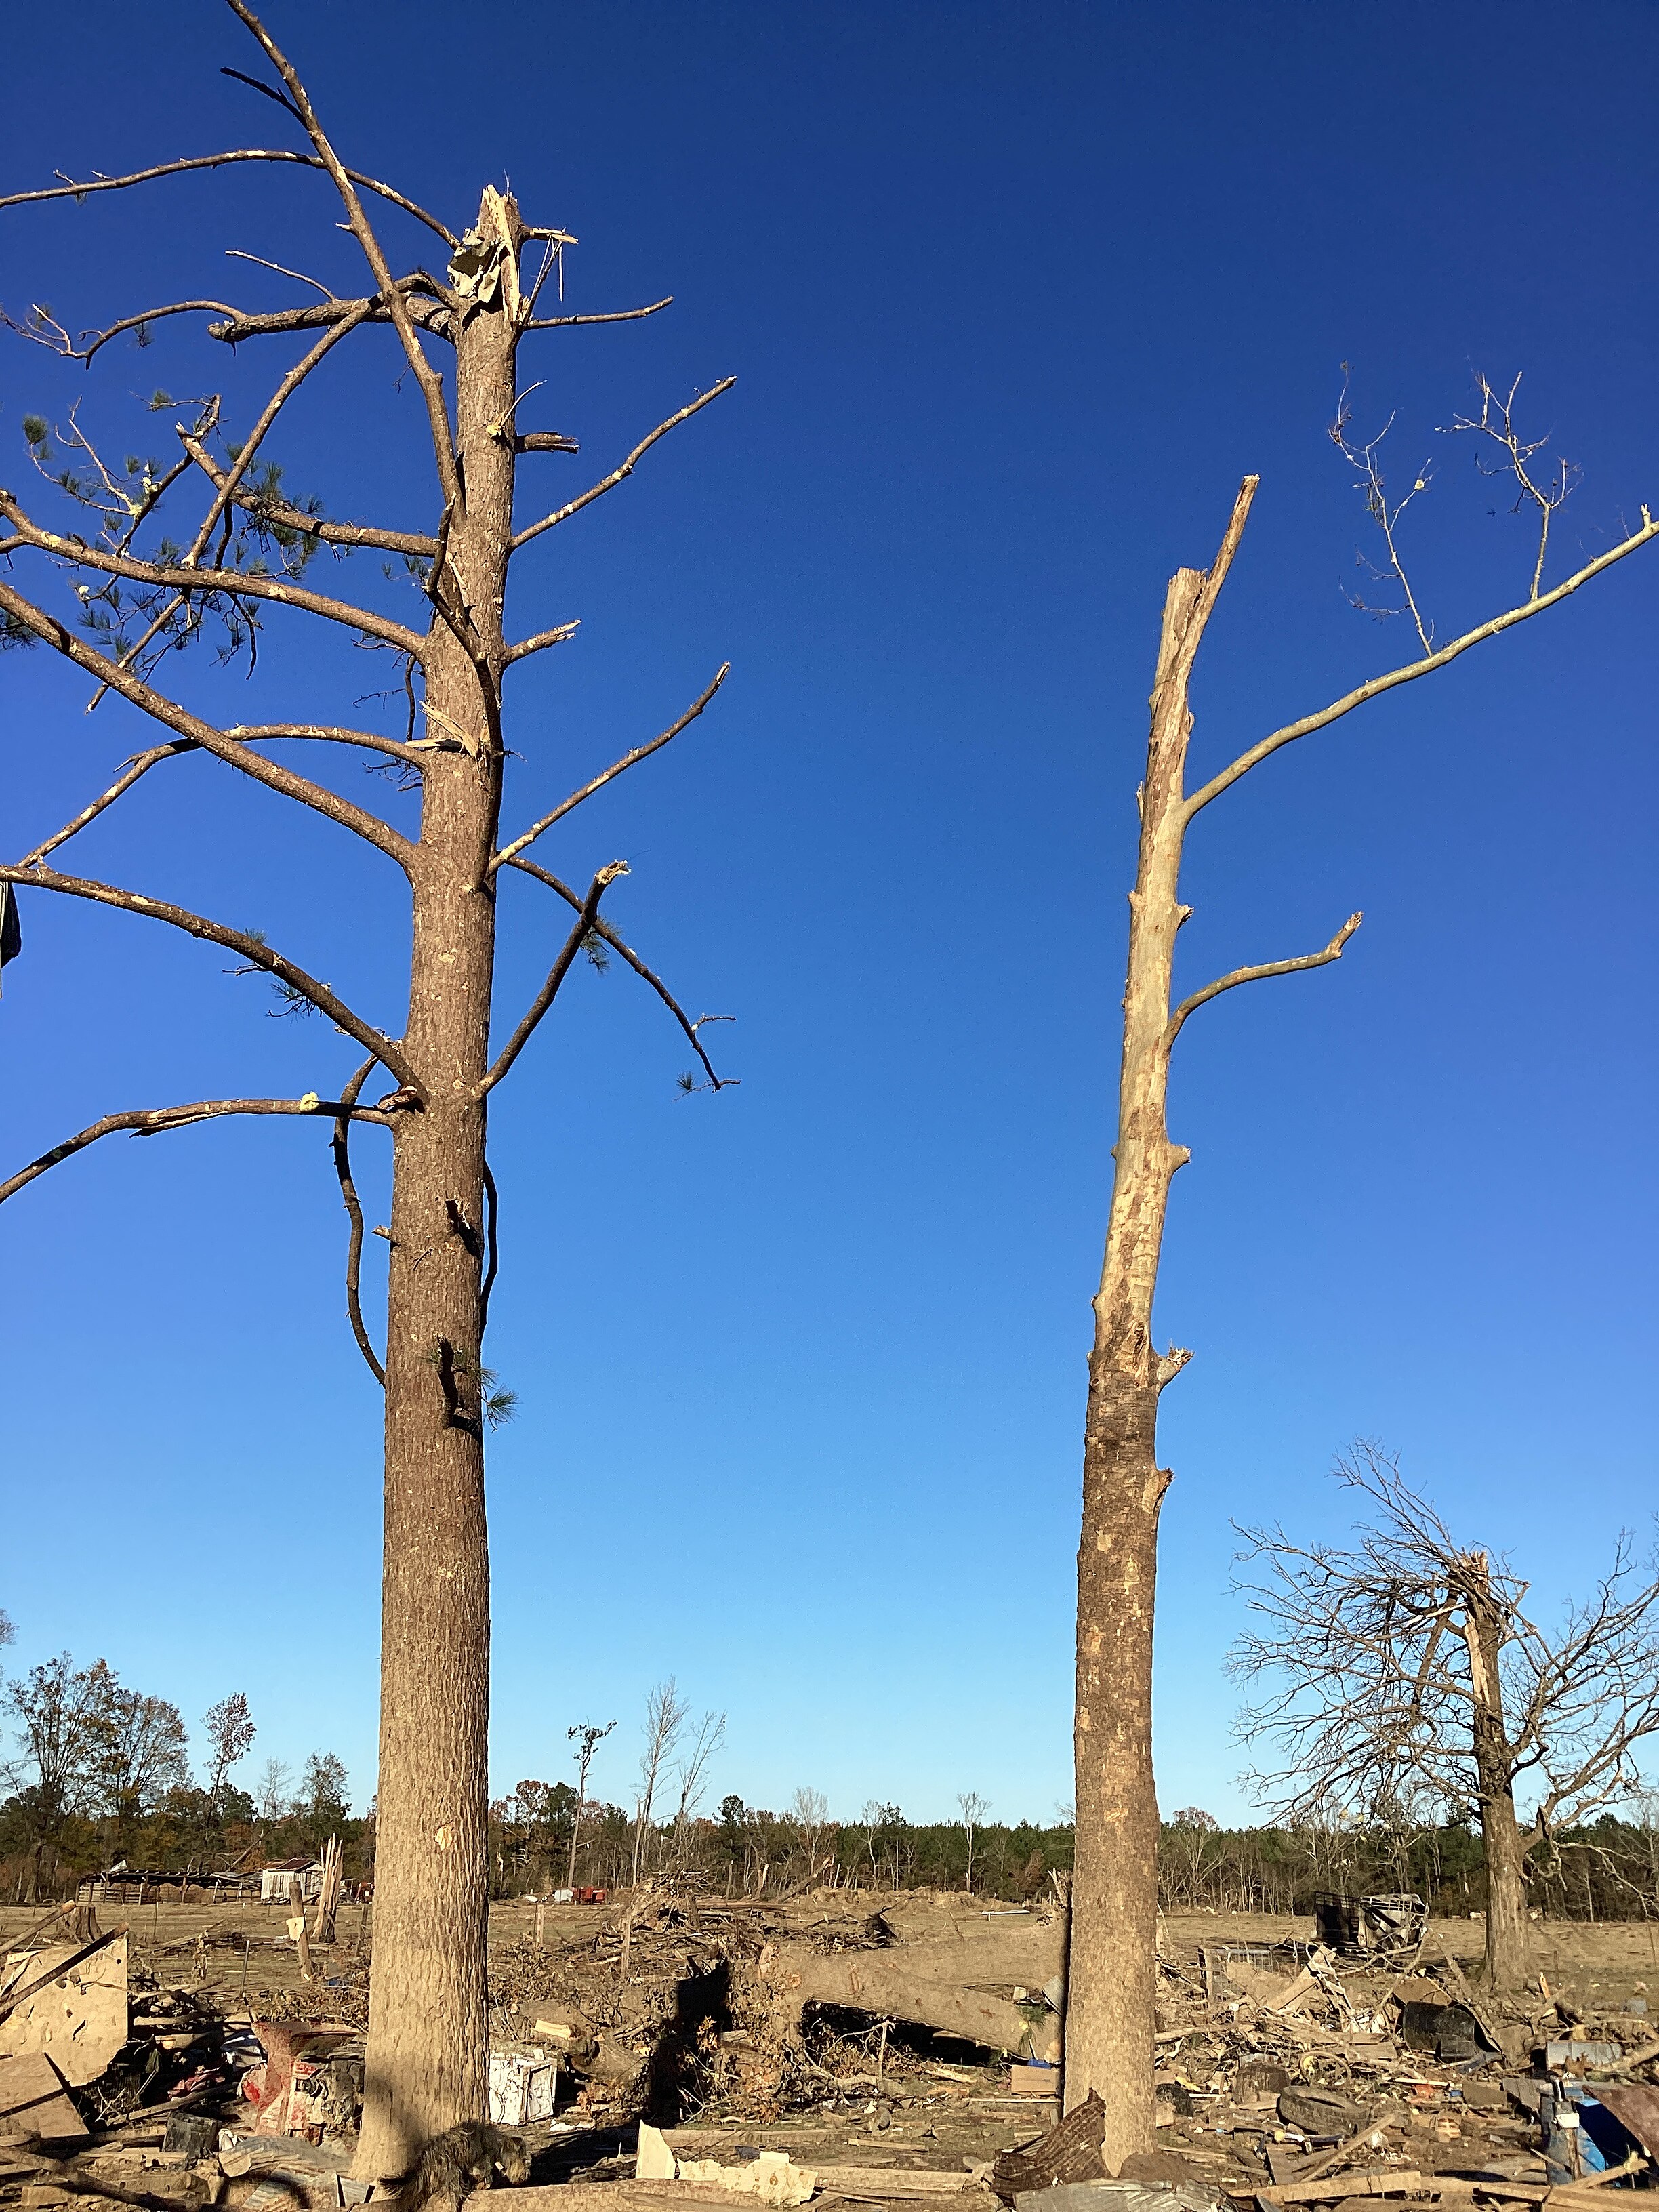 Low-end EF3 damage to trees southeast of Clarks, Louisiana.